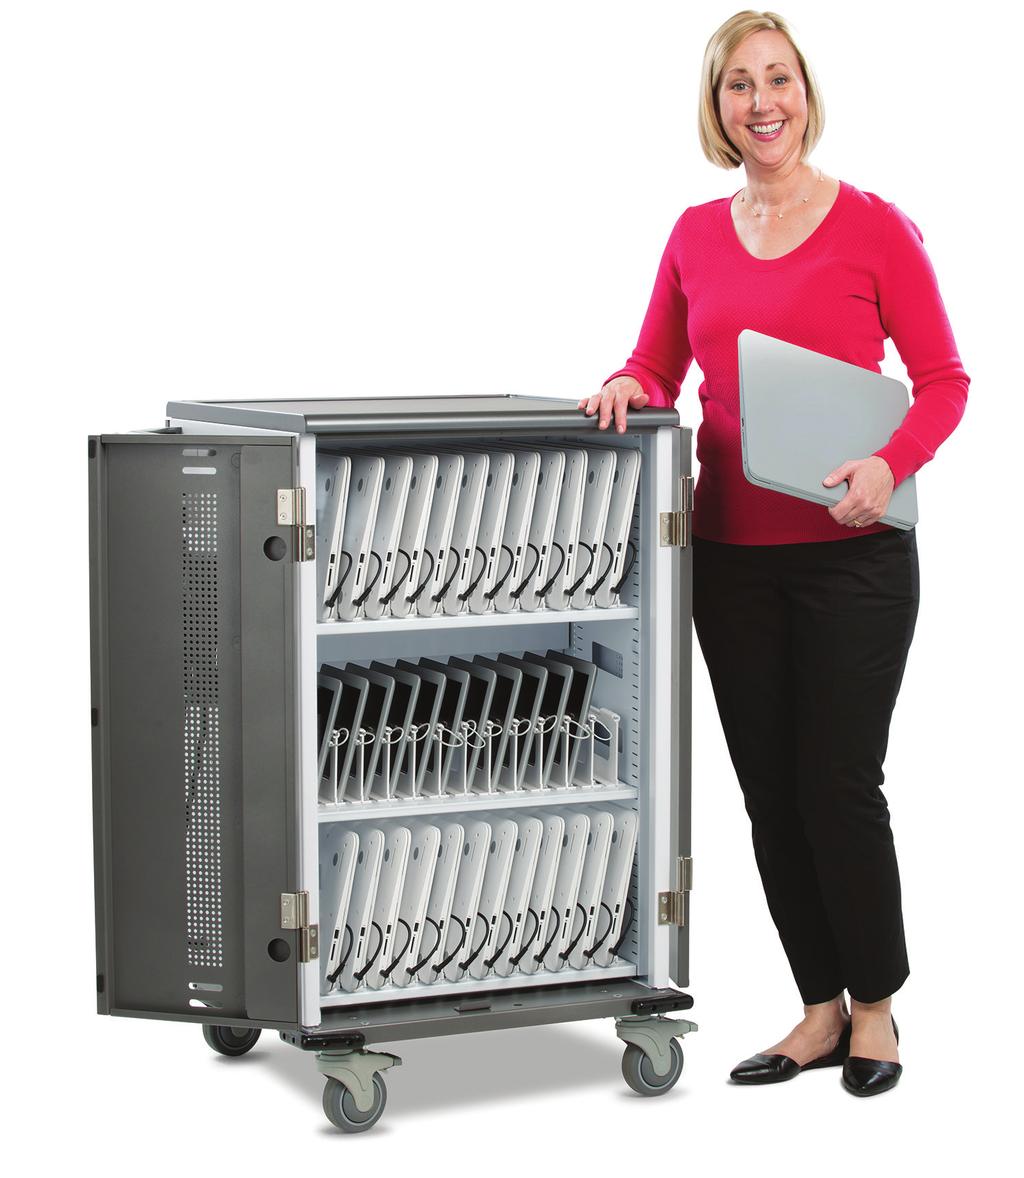 ERGOTRON & ANTHRO-DNA STRENGTHS Sleek, compact designs with a small footprint Universal design fits all